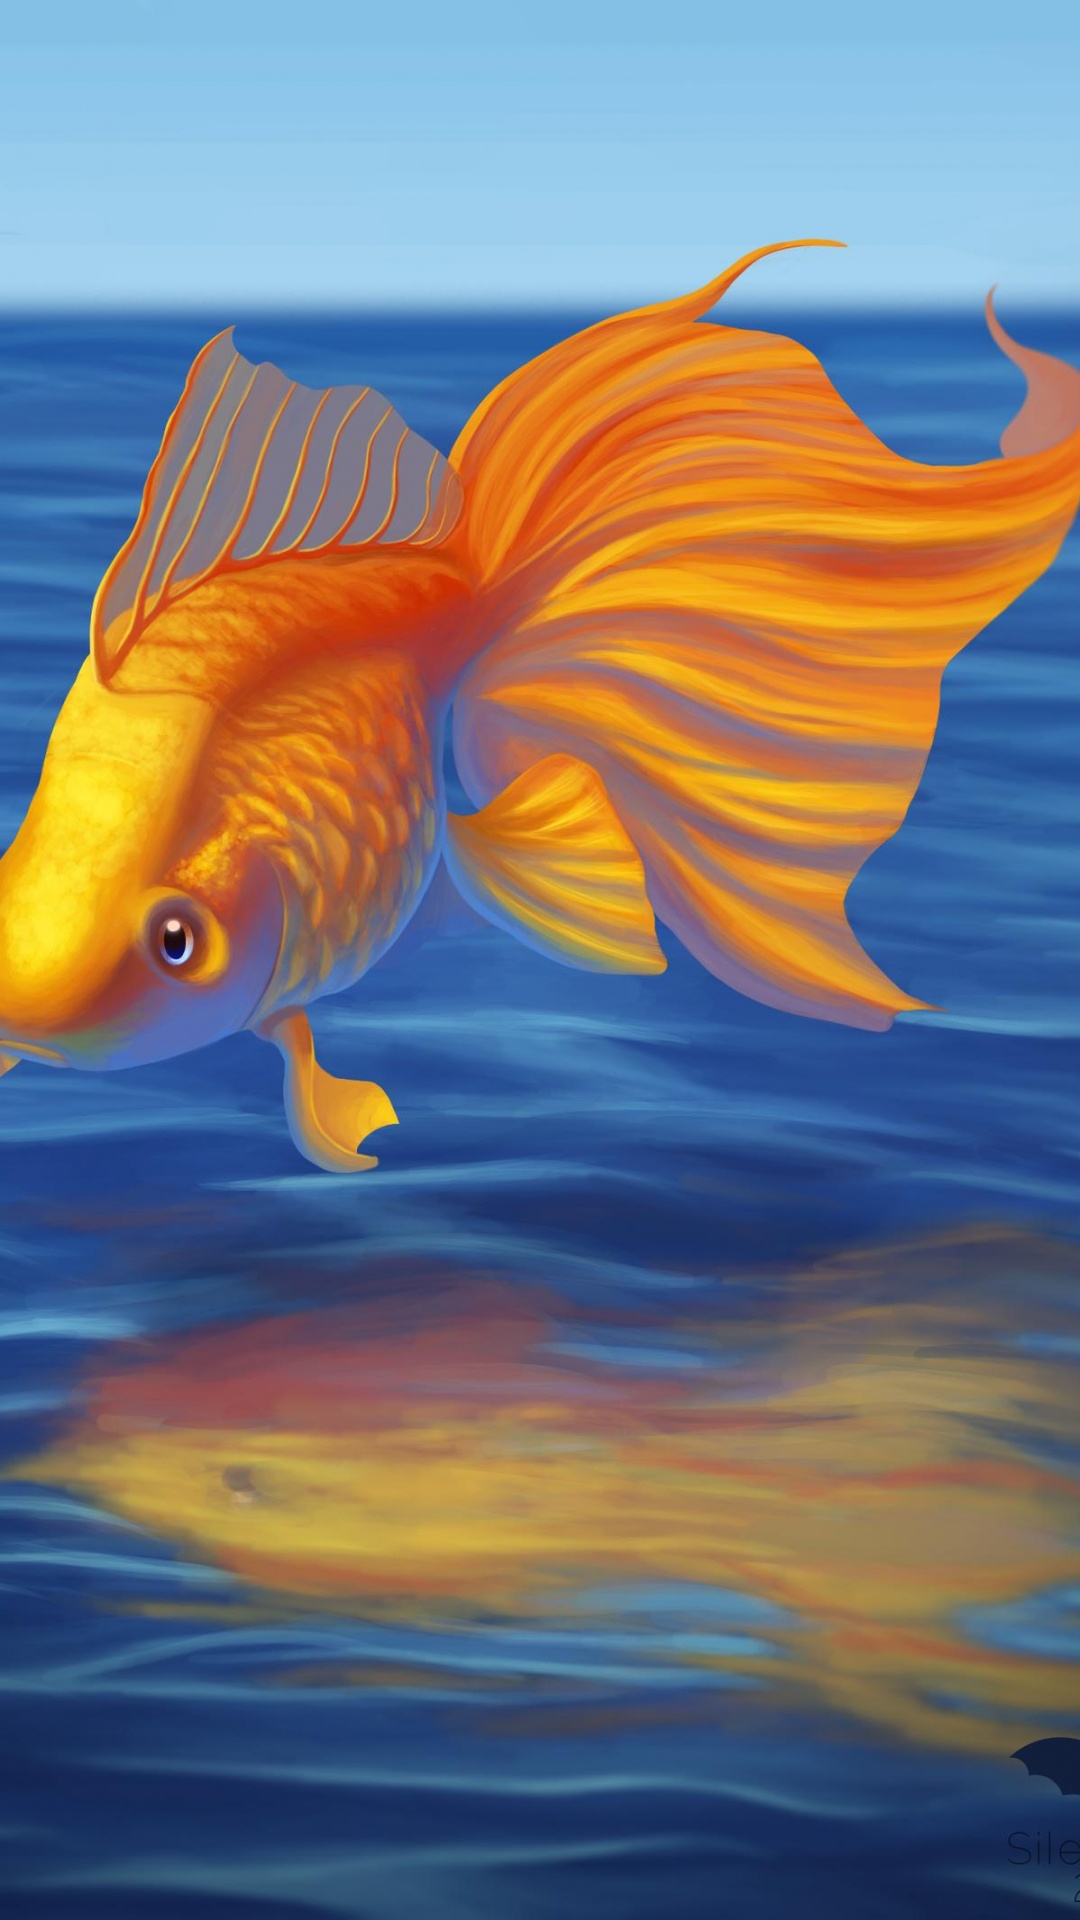 Orange and White Fish in Water. Wallpaper in 1080x1920 Resolution